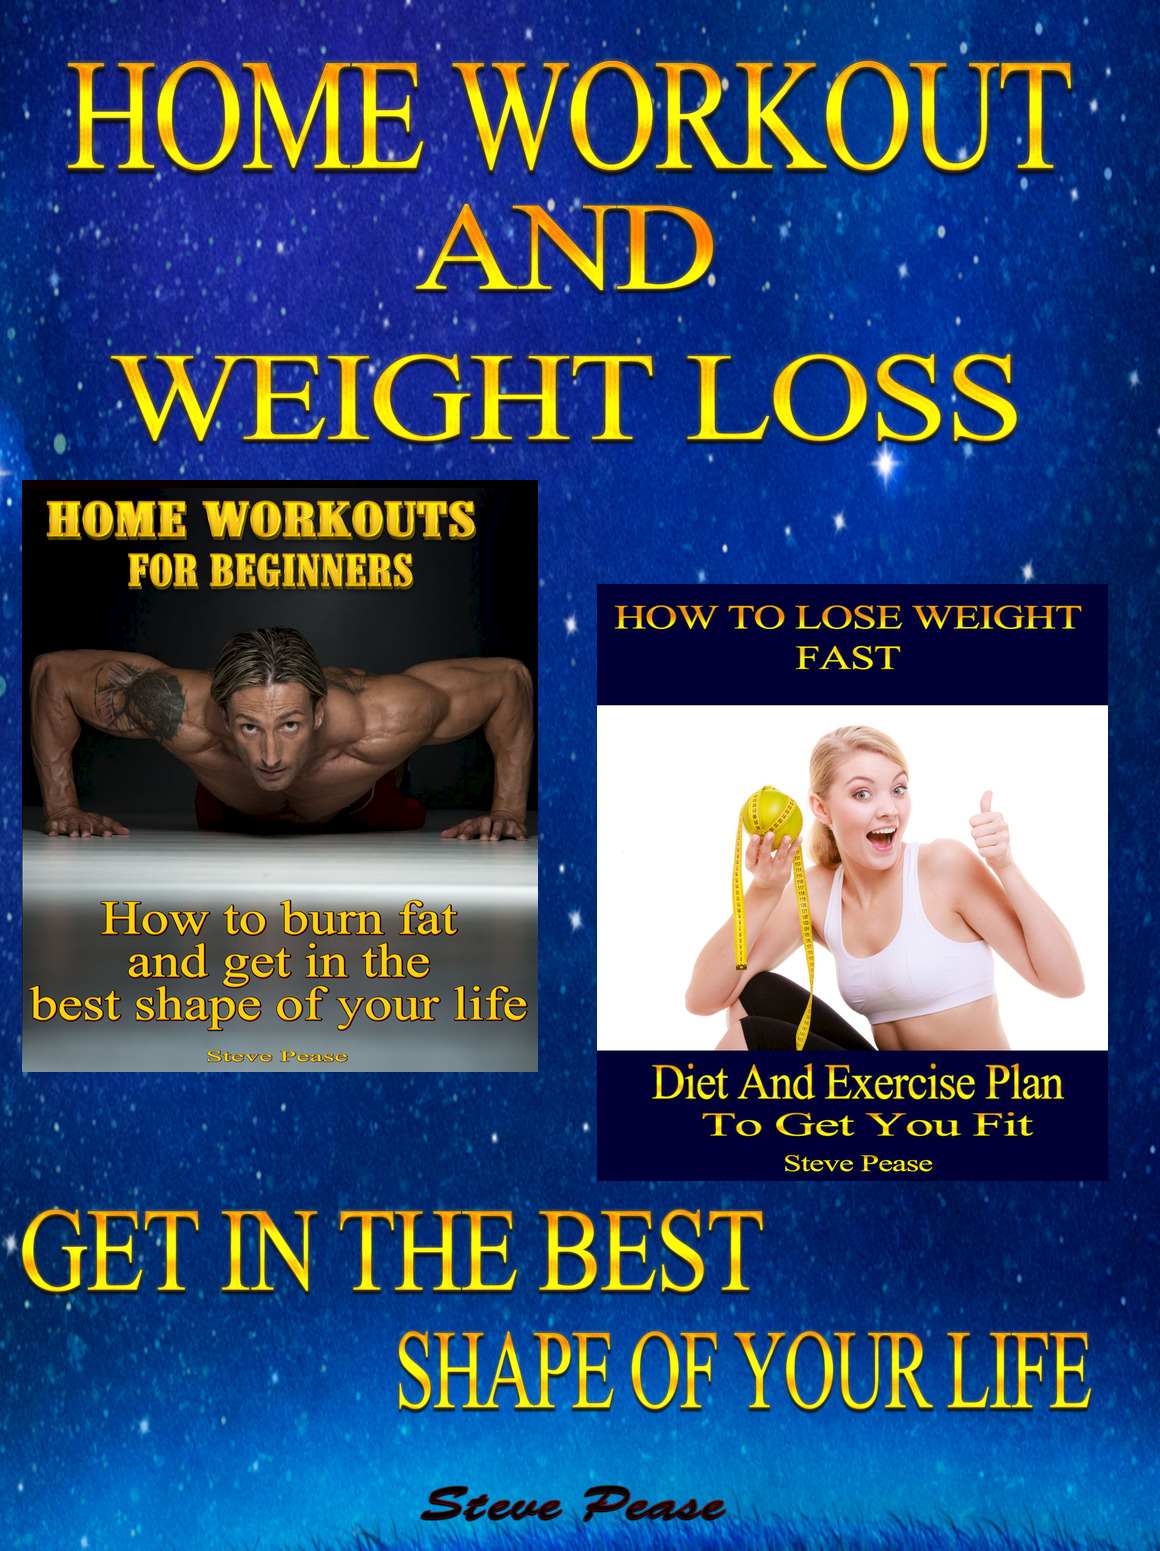 WORKOUT AND LOSE WEIGHT